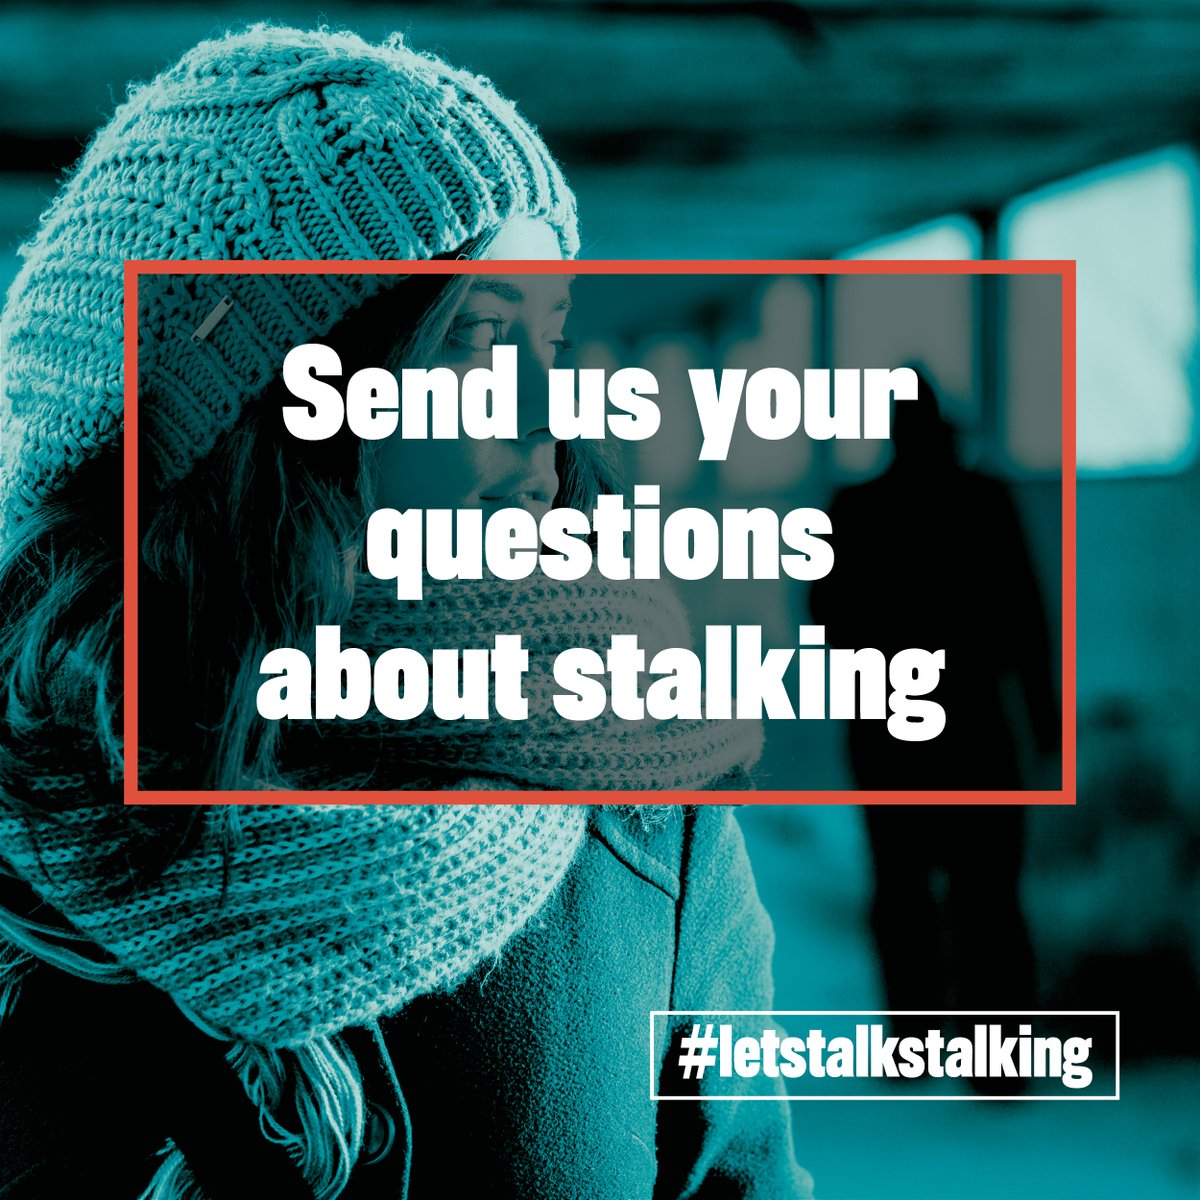 During Stalking Awareness Week next week, we’re hosting an online Q&A with some of our expert officers for you to ask questions on the topic. You can submit your questions in advance or join us on the day. 🗓️ Thursday 25 April 🕑 2:30pm – 4pm 💻 orlo.uk/RT98u